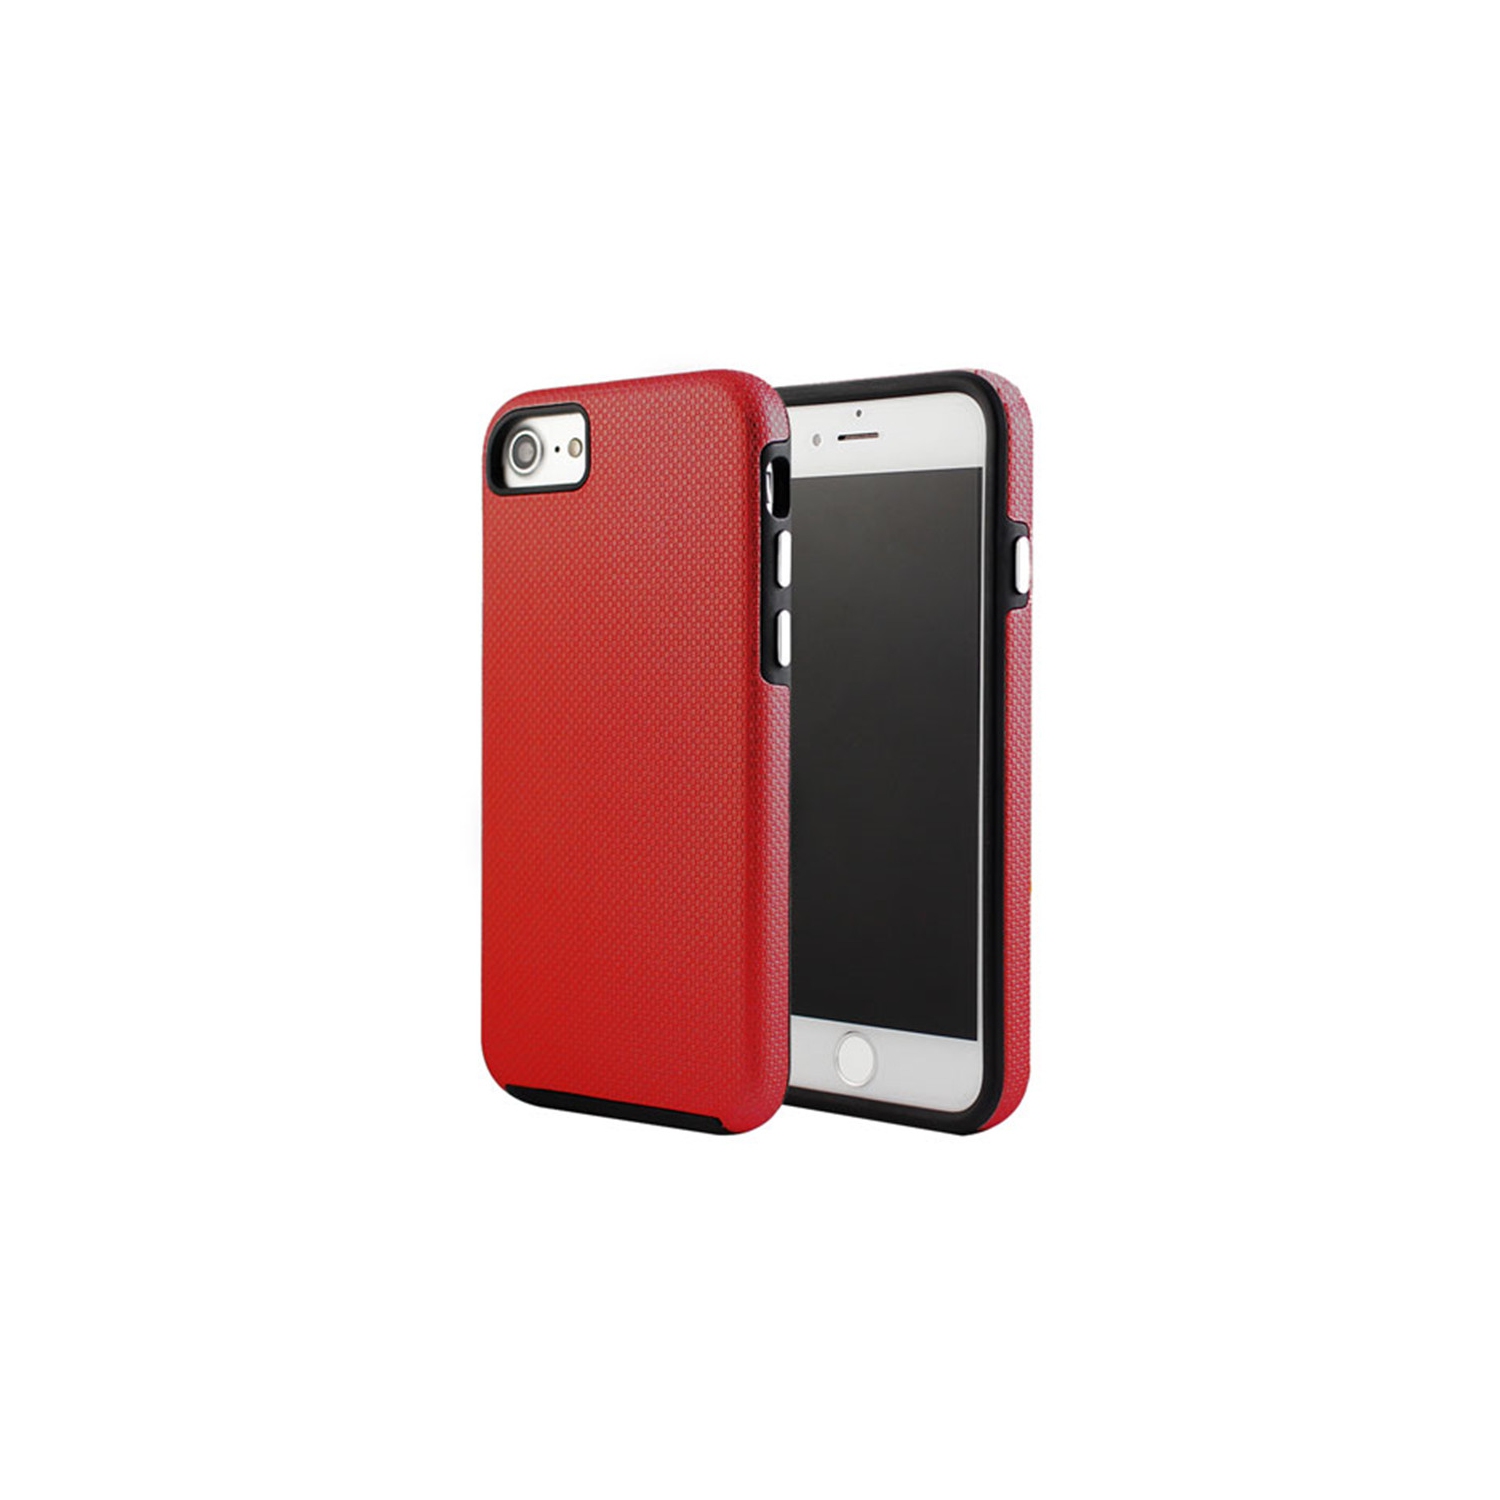 【CSmart】 Slim Fitted Hybrid Hard PC Shell Shockproof Scratch Resistant Case Cover for iPhone 7 / 8 (4.7"), Red